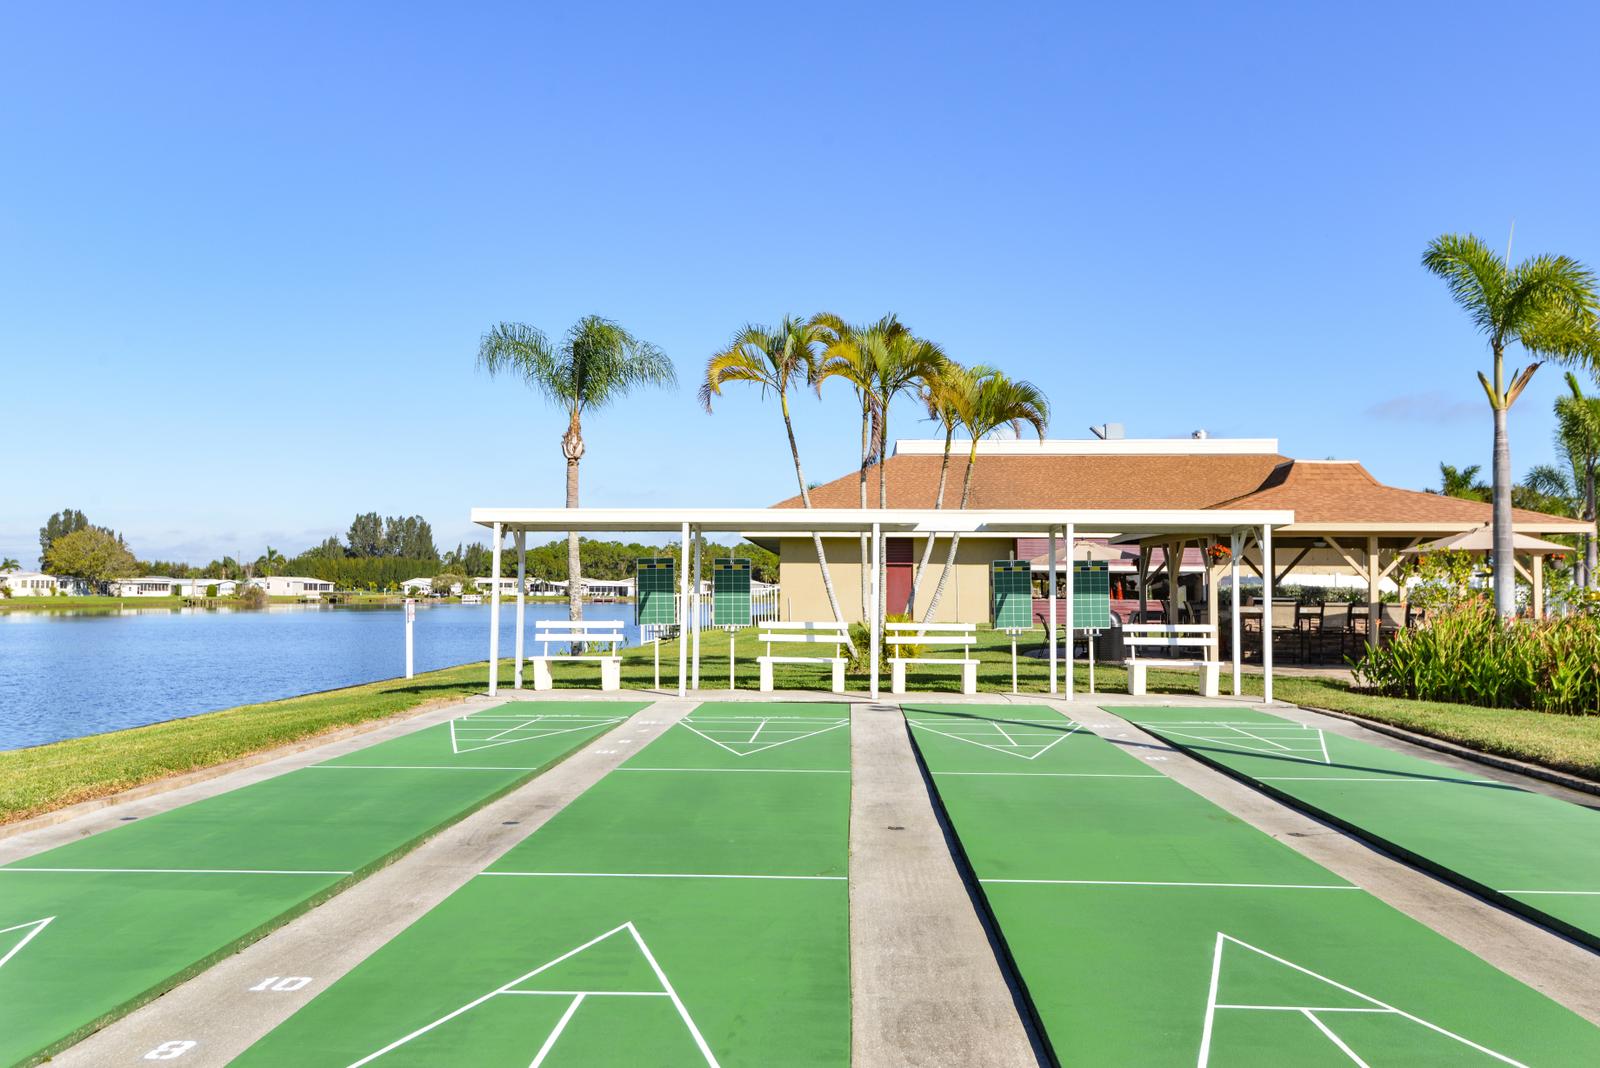 Four shuffleboard courts with covered seating. Sits next to lake.